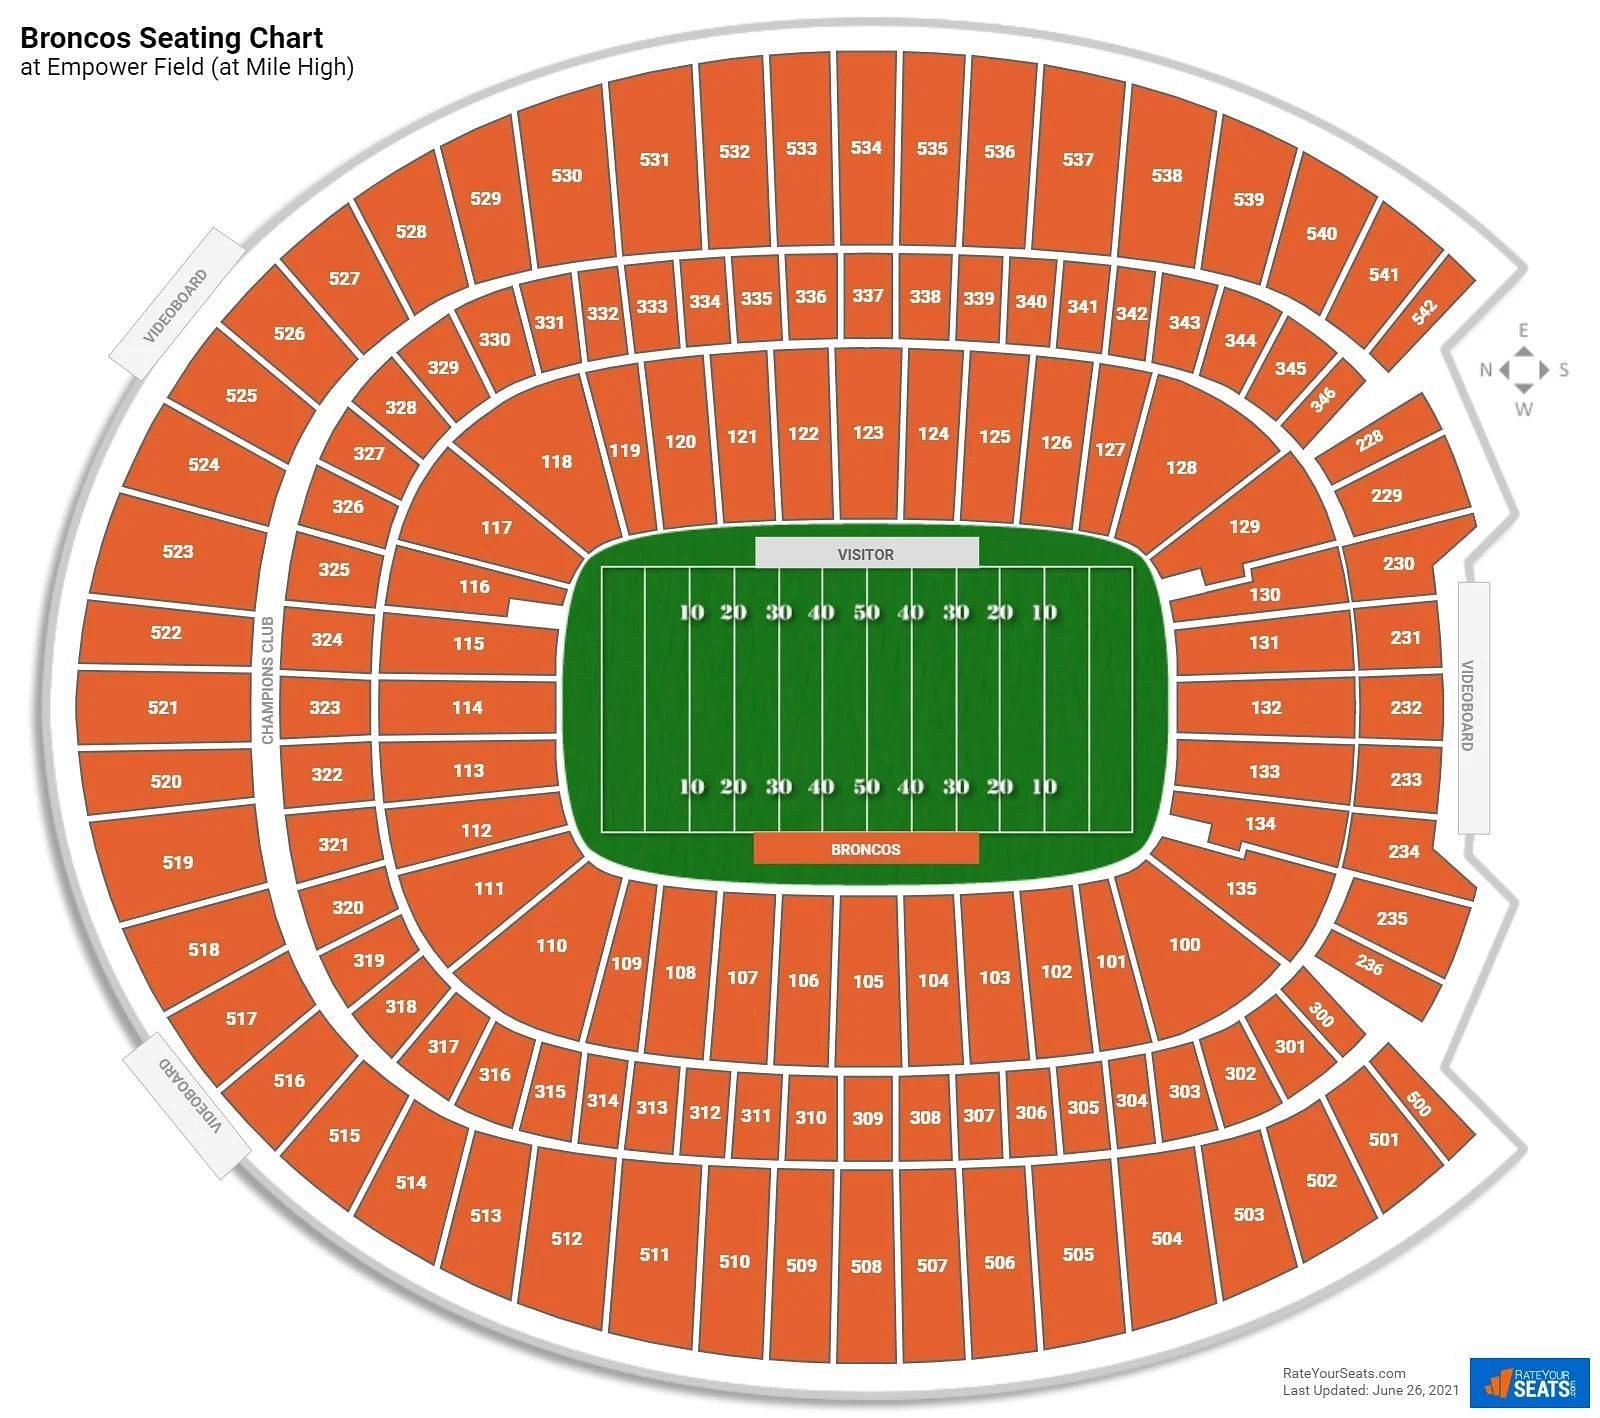 Empower Field at Mile High Seating Plan